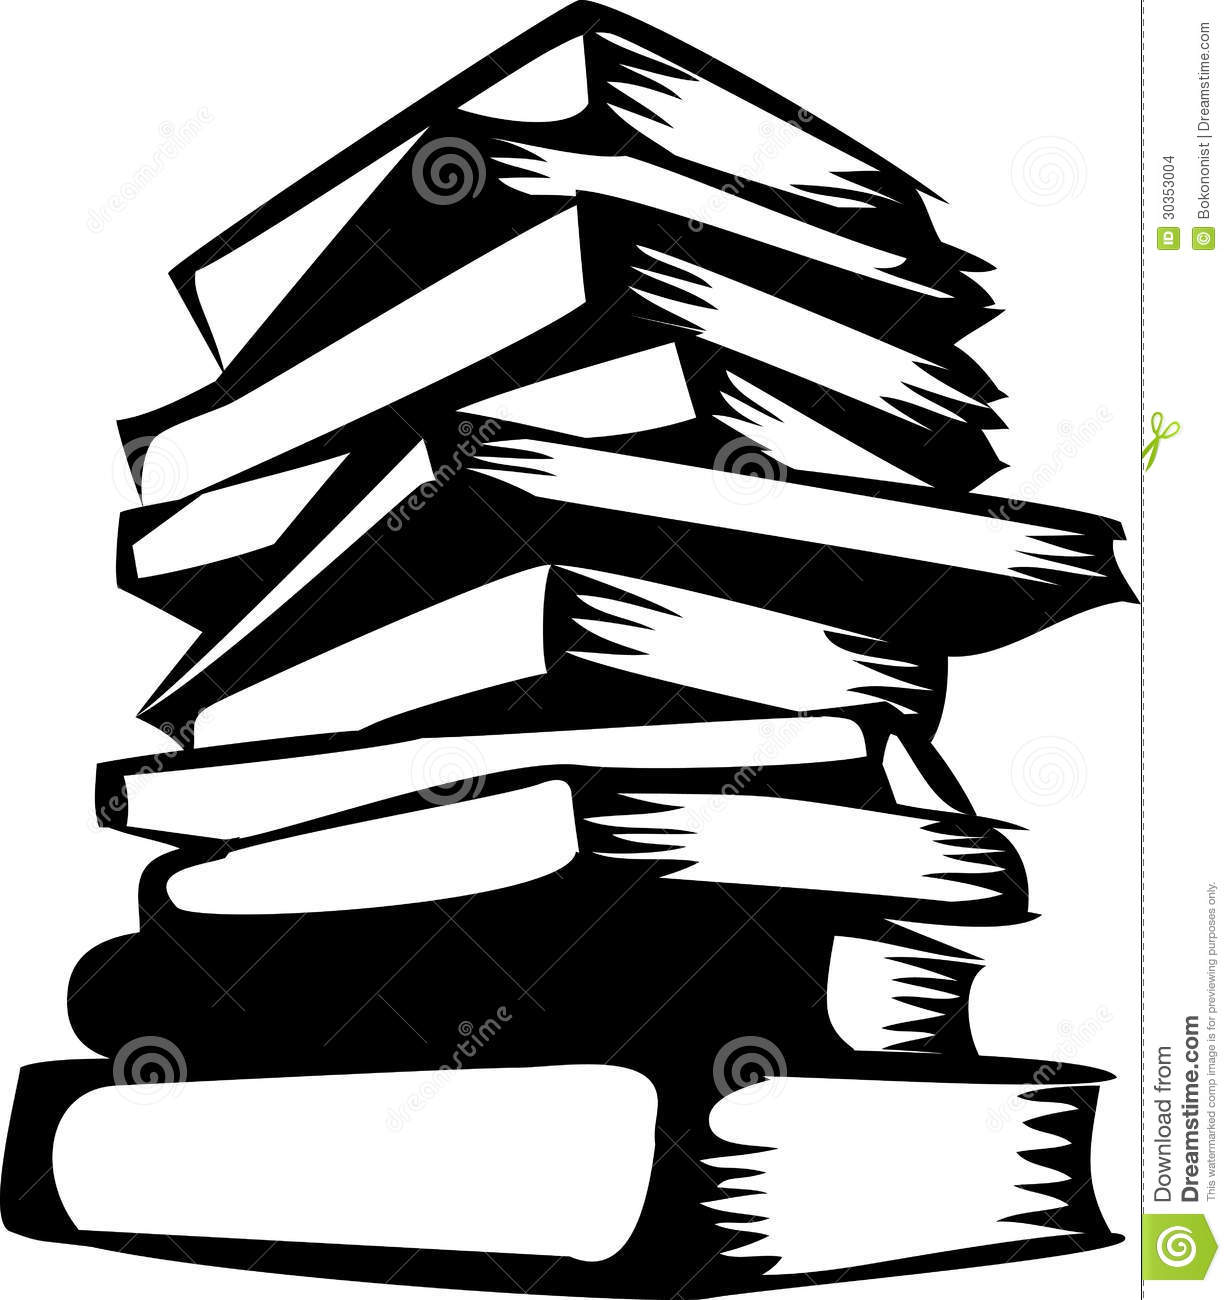 Stack Of Books Clip Art Black And White   Clipart Panda   Free Clipart